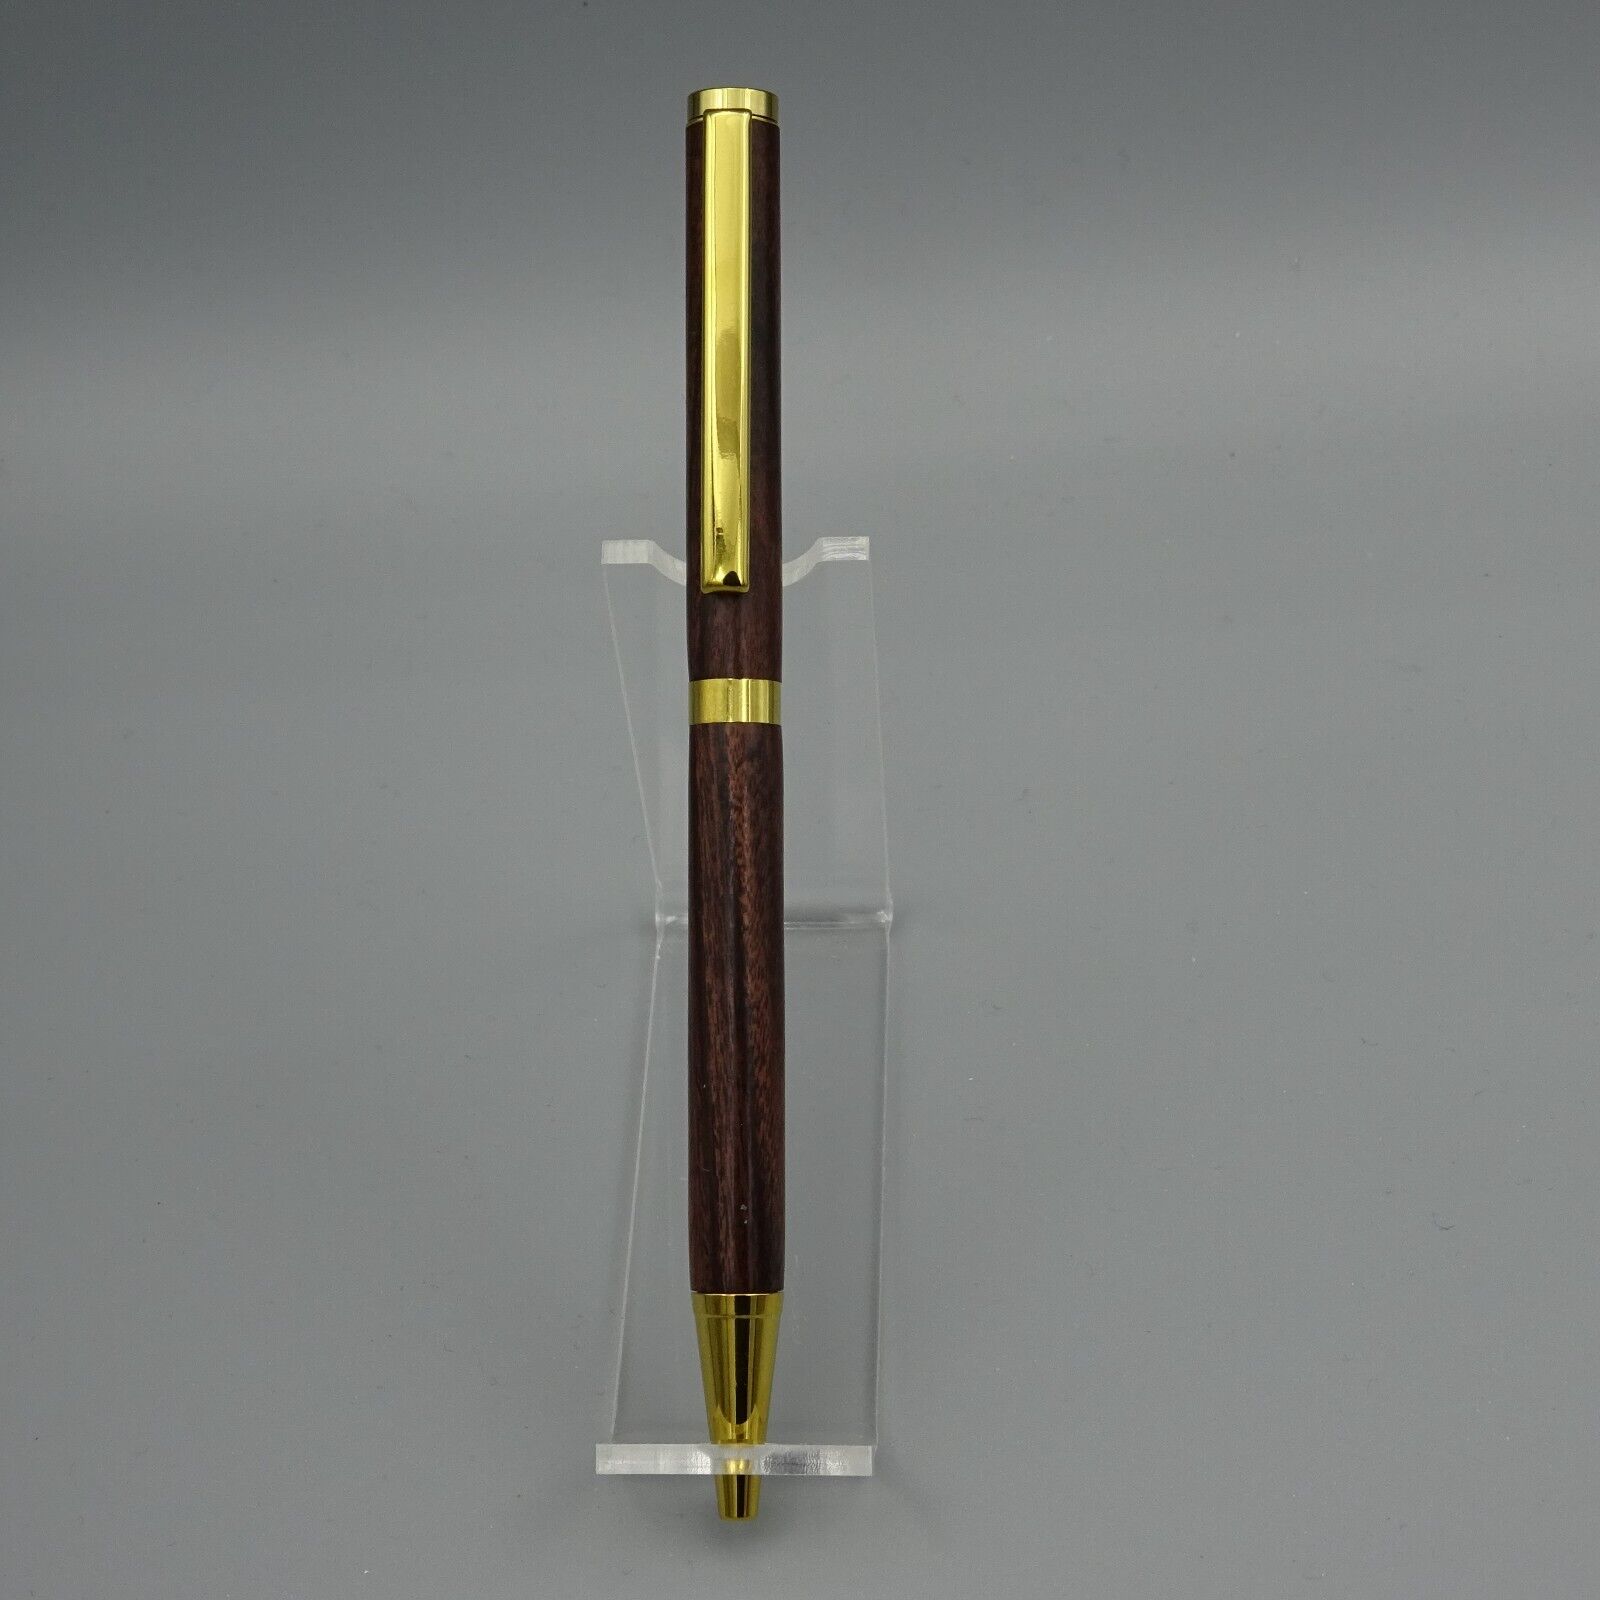 SLIMLINE TWIST PEN with BOLIVIAN ROSEWOOD BARREL and GOLD TRIM